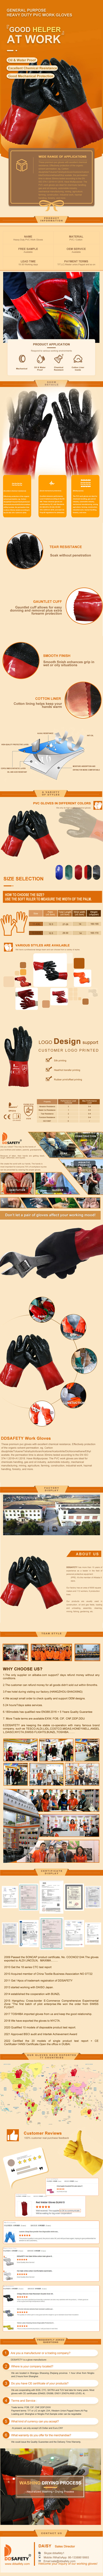 Heavy Duty Chemical Resistant Pvc Coated Work Gloves - DPV214 Heavy Duty Chemical Resistant Pvc Coated Work Gloves - DPV214 gloves,pvc gloves,PVC Coated Gloves,Chemical Resistant Gloves,work gloves